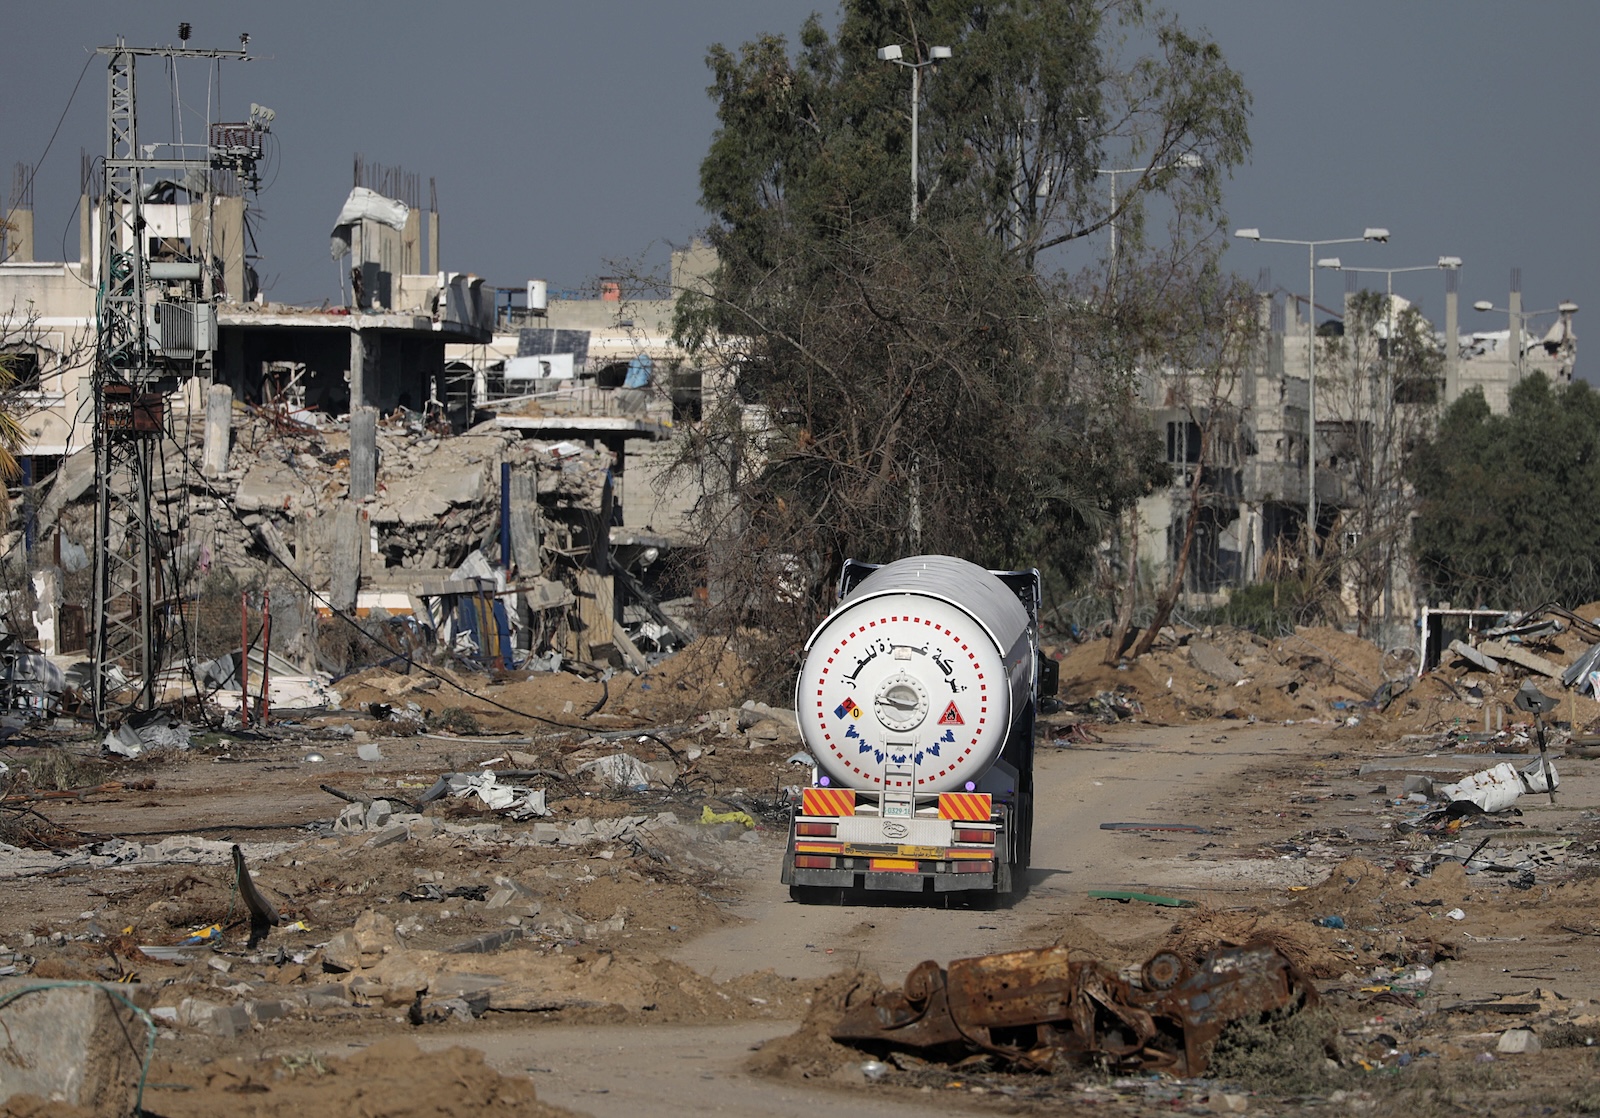 epa11001323 A fuel truck crosses from the southern Gaza Strip into the northern Gaza Strip along Salah Al Din road, in the central Gaza Strip, 29 November 2023. The four-day ceasefire agreed upon by Israel and Hamas was extended by 48 hours on 27 November, followed by more talks about a possible further extension. The Israeli army on 29 November has reissued its daily message to the residents of Gaza to avoid moving back into northern Gaza which is considered a â€œwar zone", to not approach within one kilometer of the border and to not access the sea.  EPA/MOHAMMED SABER